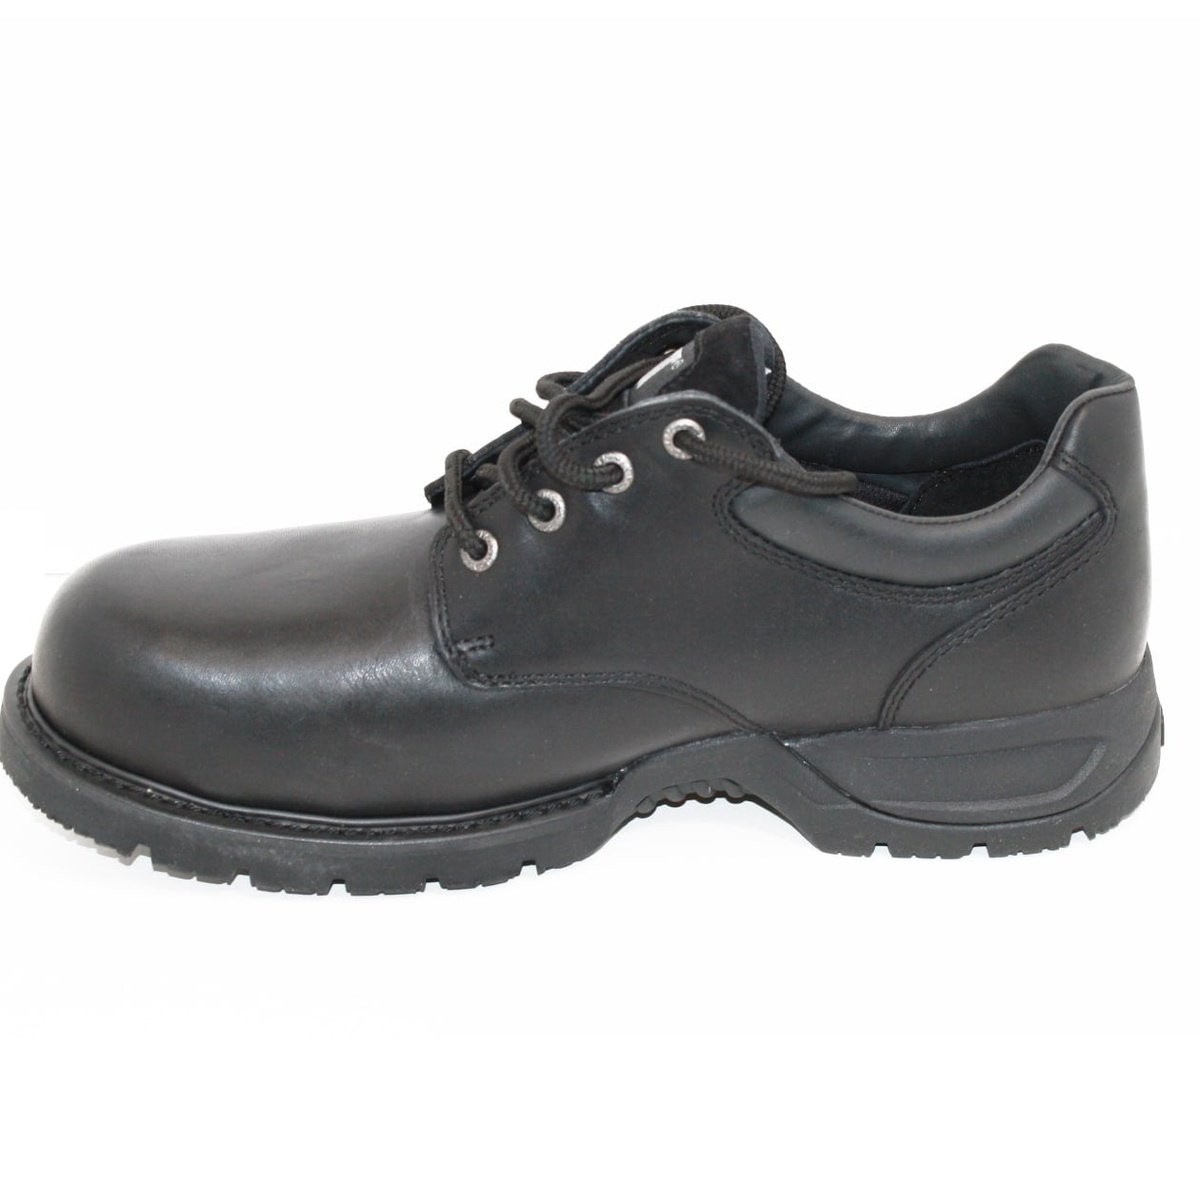 CAT Men's Work Shoes Converter Steel Toe P706071 - Clearance - Clearance